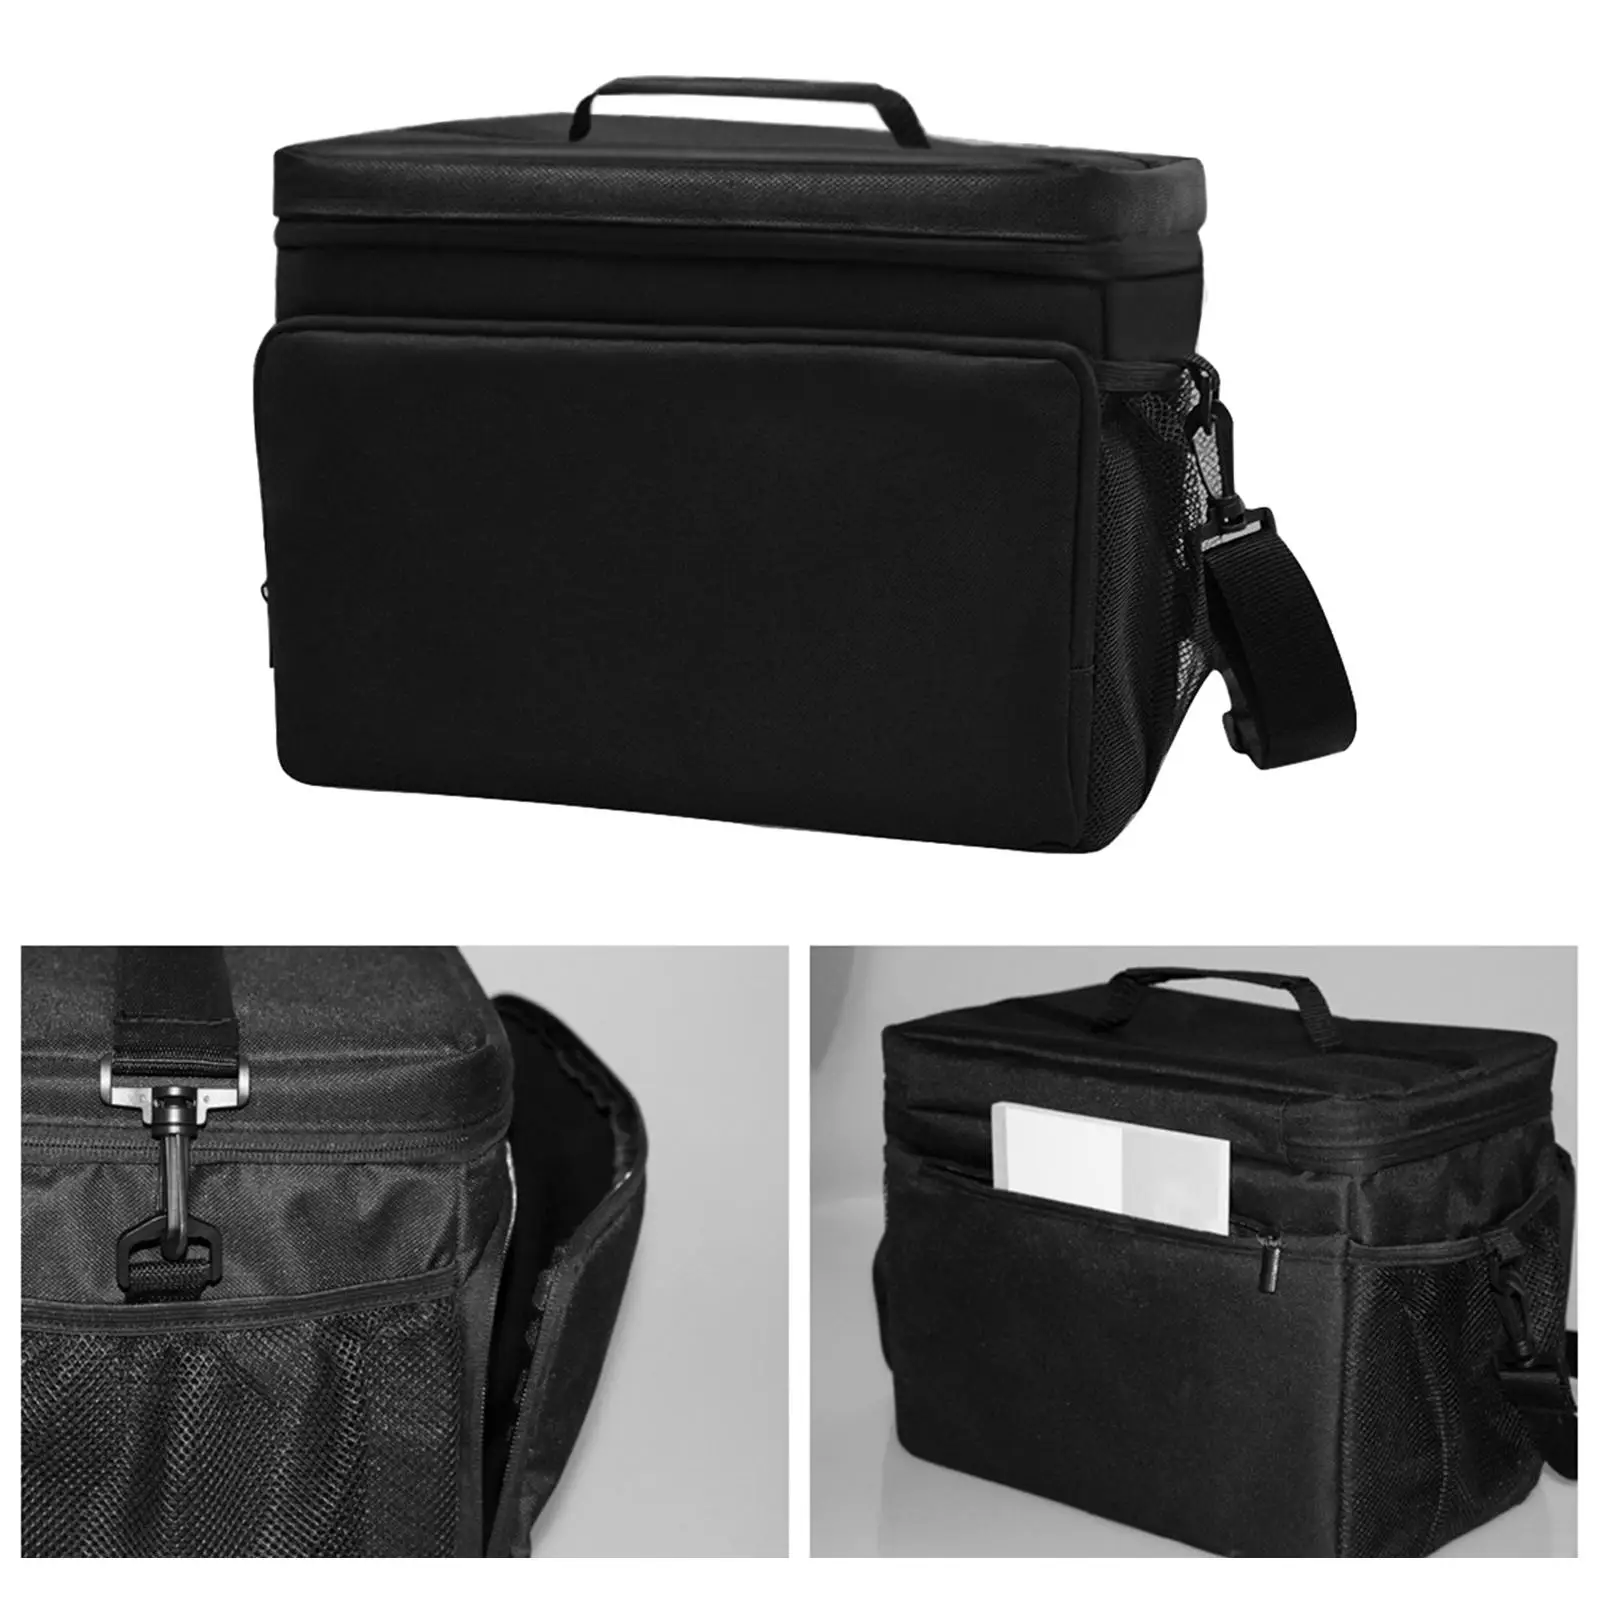 Insulated Bag Large Capacity Cooler Bag Food Container for Picnic Travel BBQ